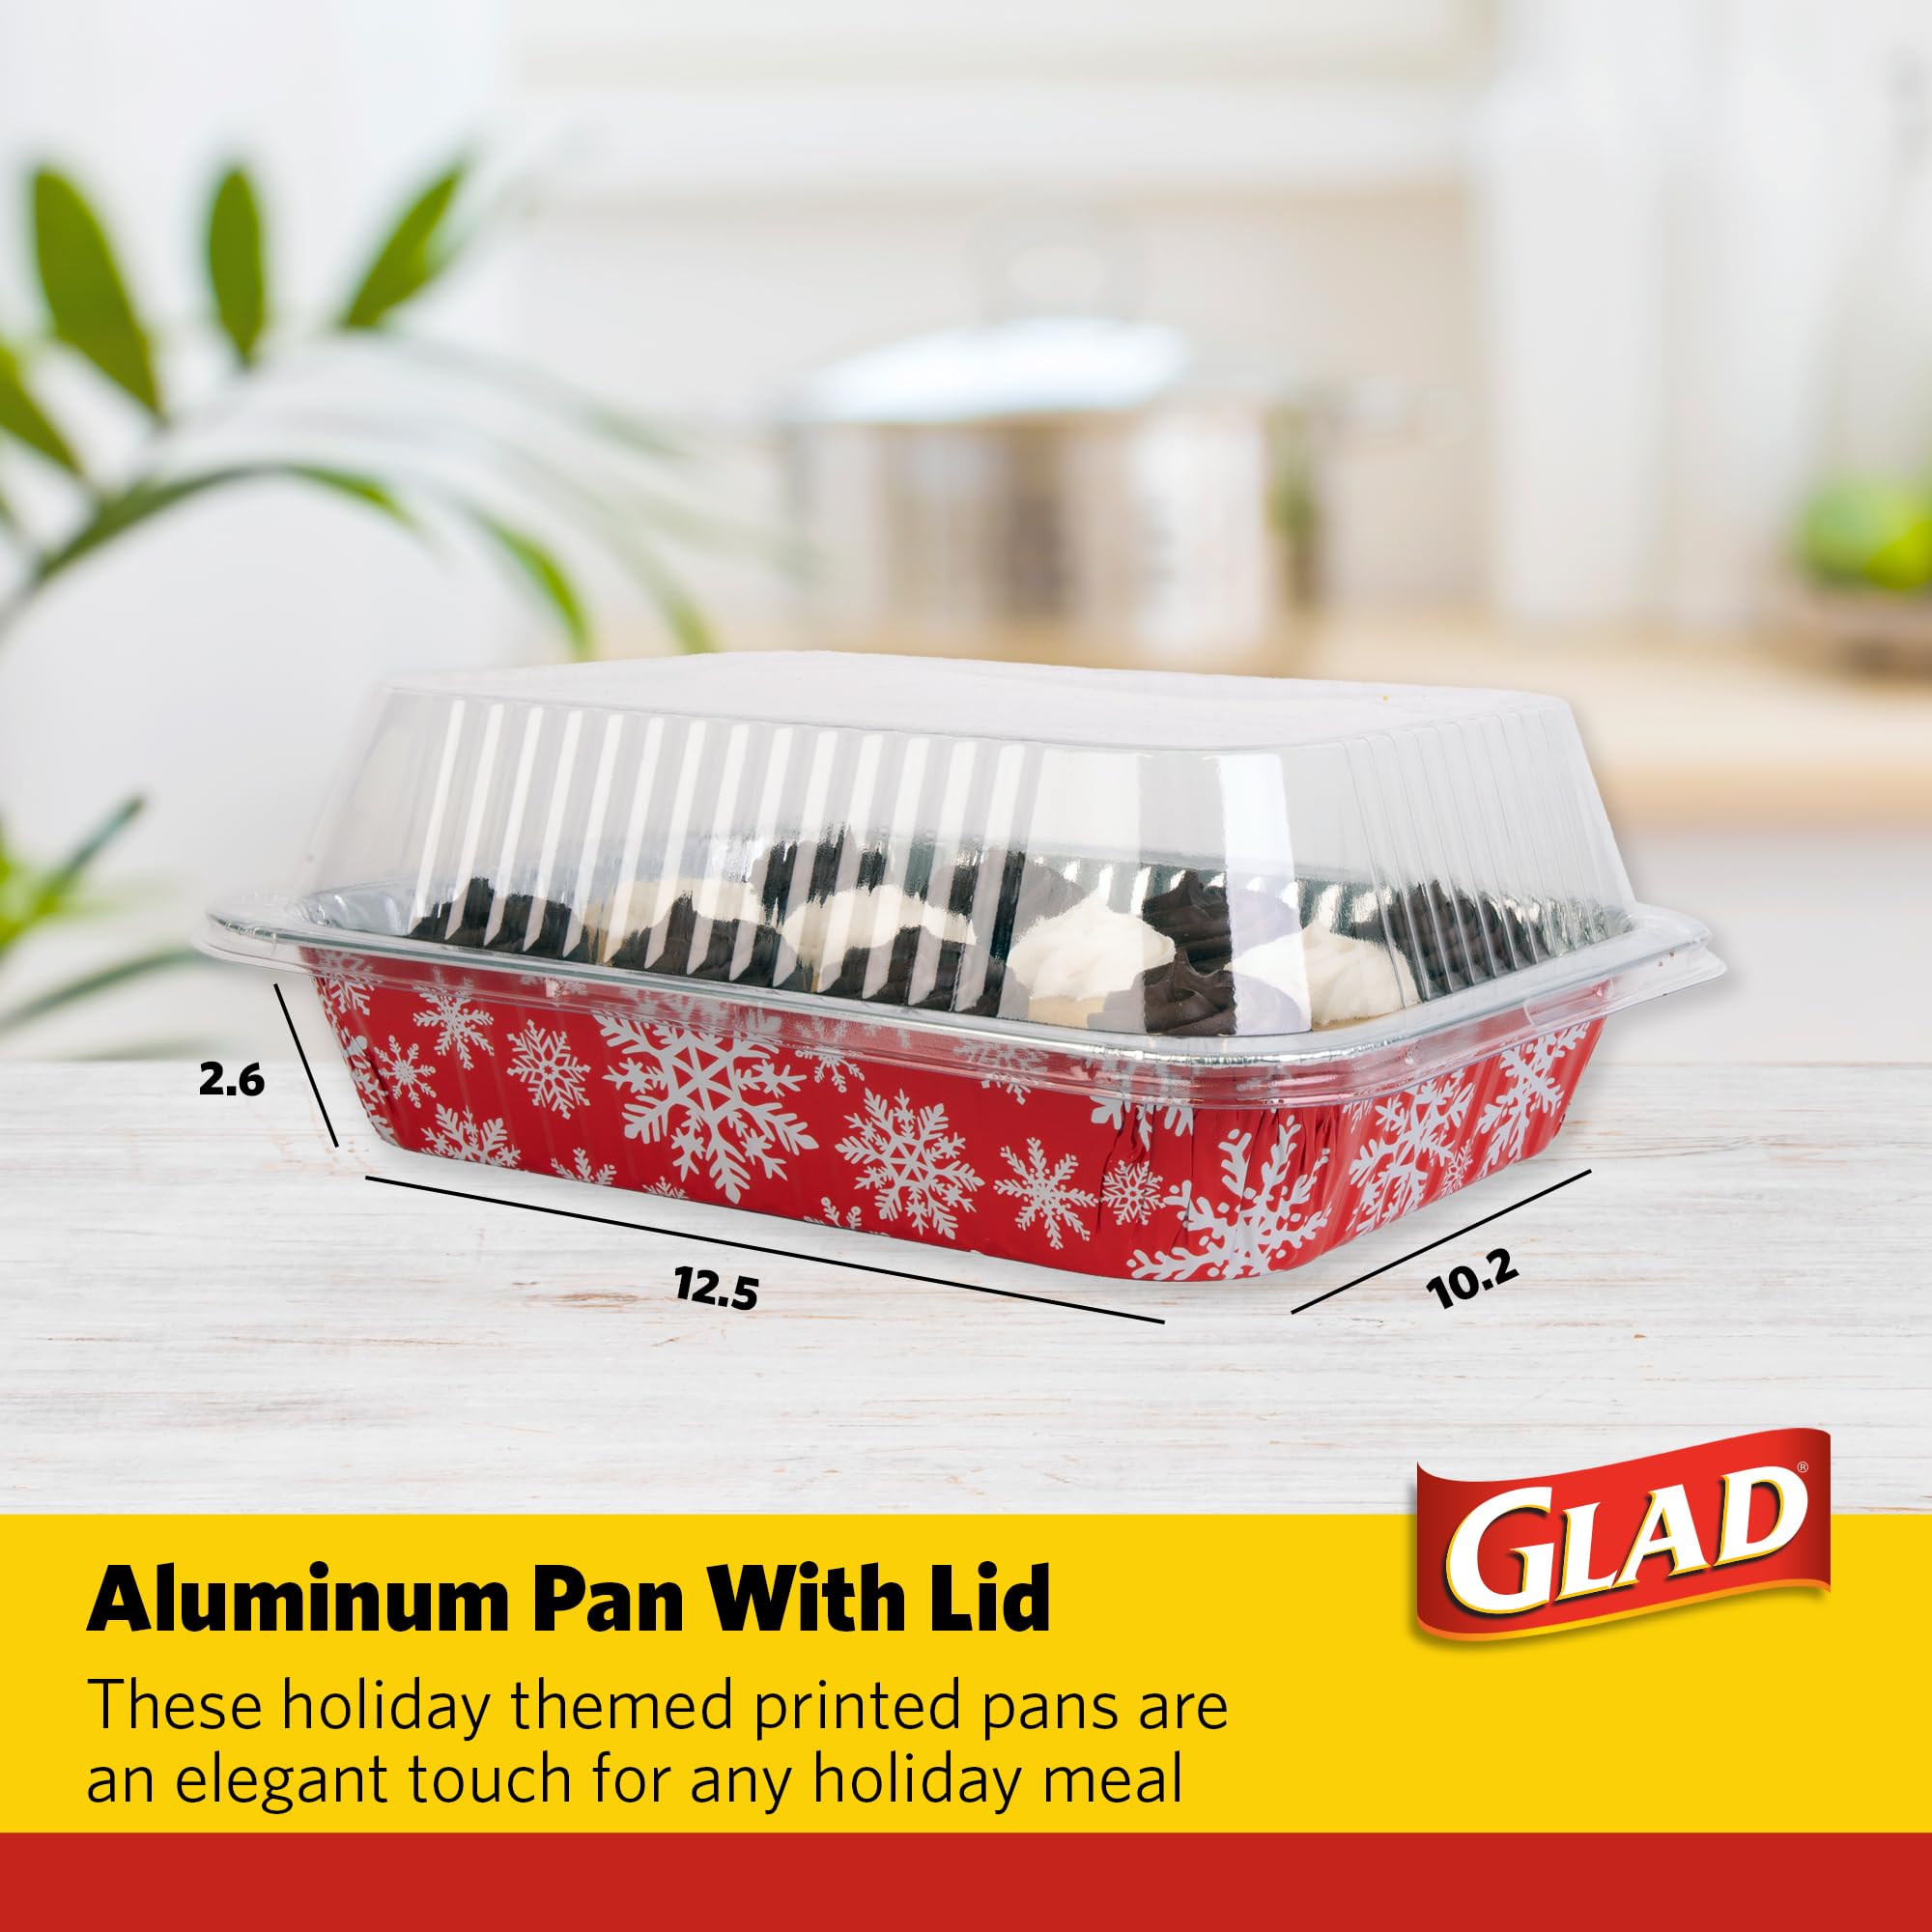 Glad Disposable Aluminum All-Purpose Pans in Red & White Snowflake Holiday Pattern, 2ct with Lids | Printed Durable Foil Steam Pans | 12.5 x 10.2 x 2.16 Aluminum Pan | Durable Disposable Steamware